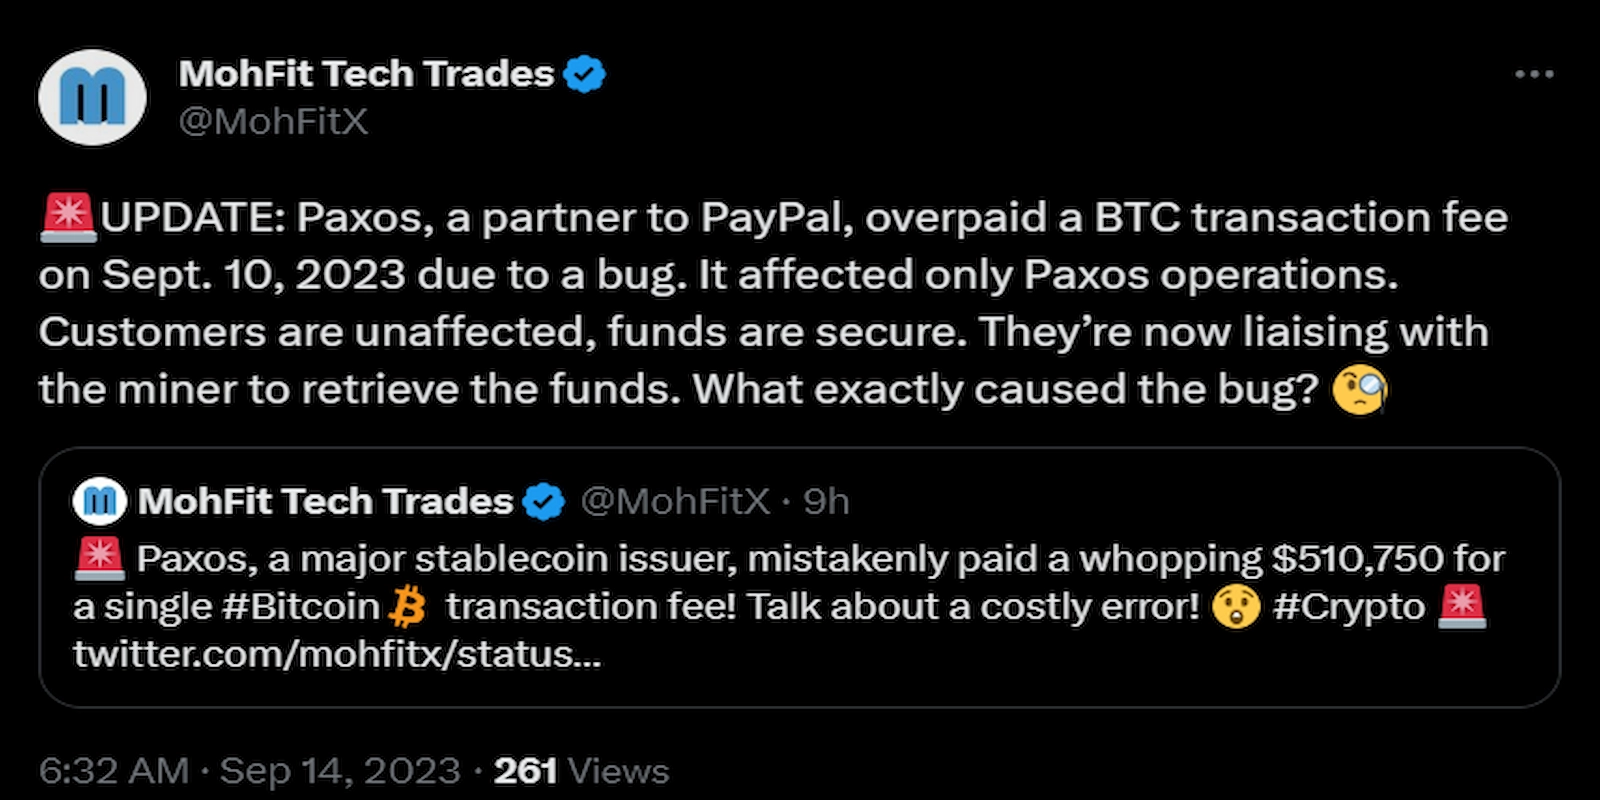 PayPal stated that its crypto partner Paxos was responsible for the error.